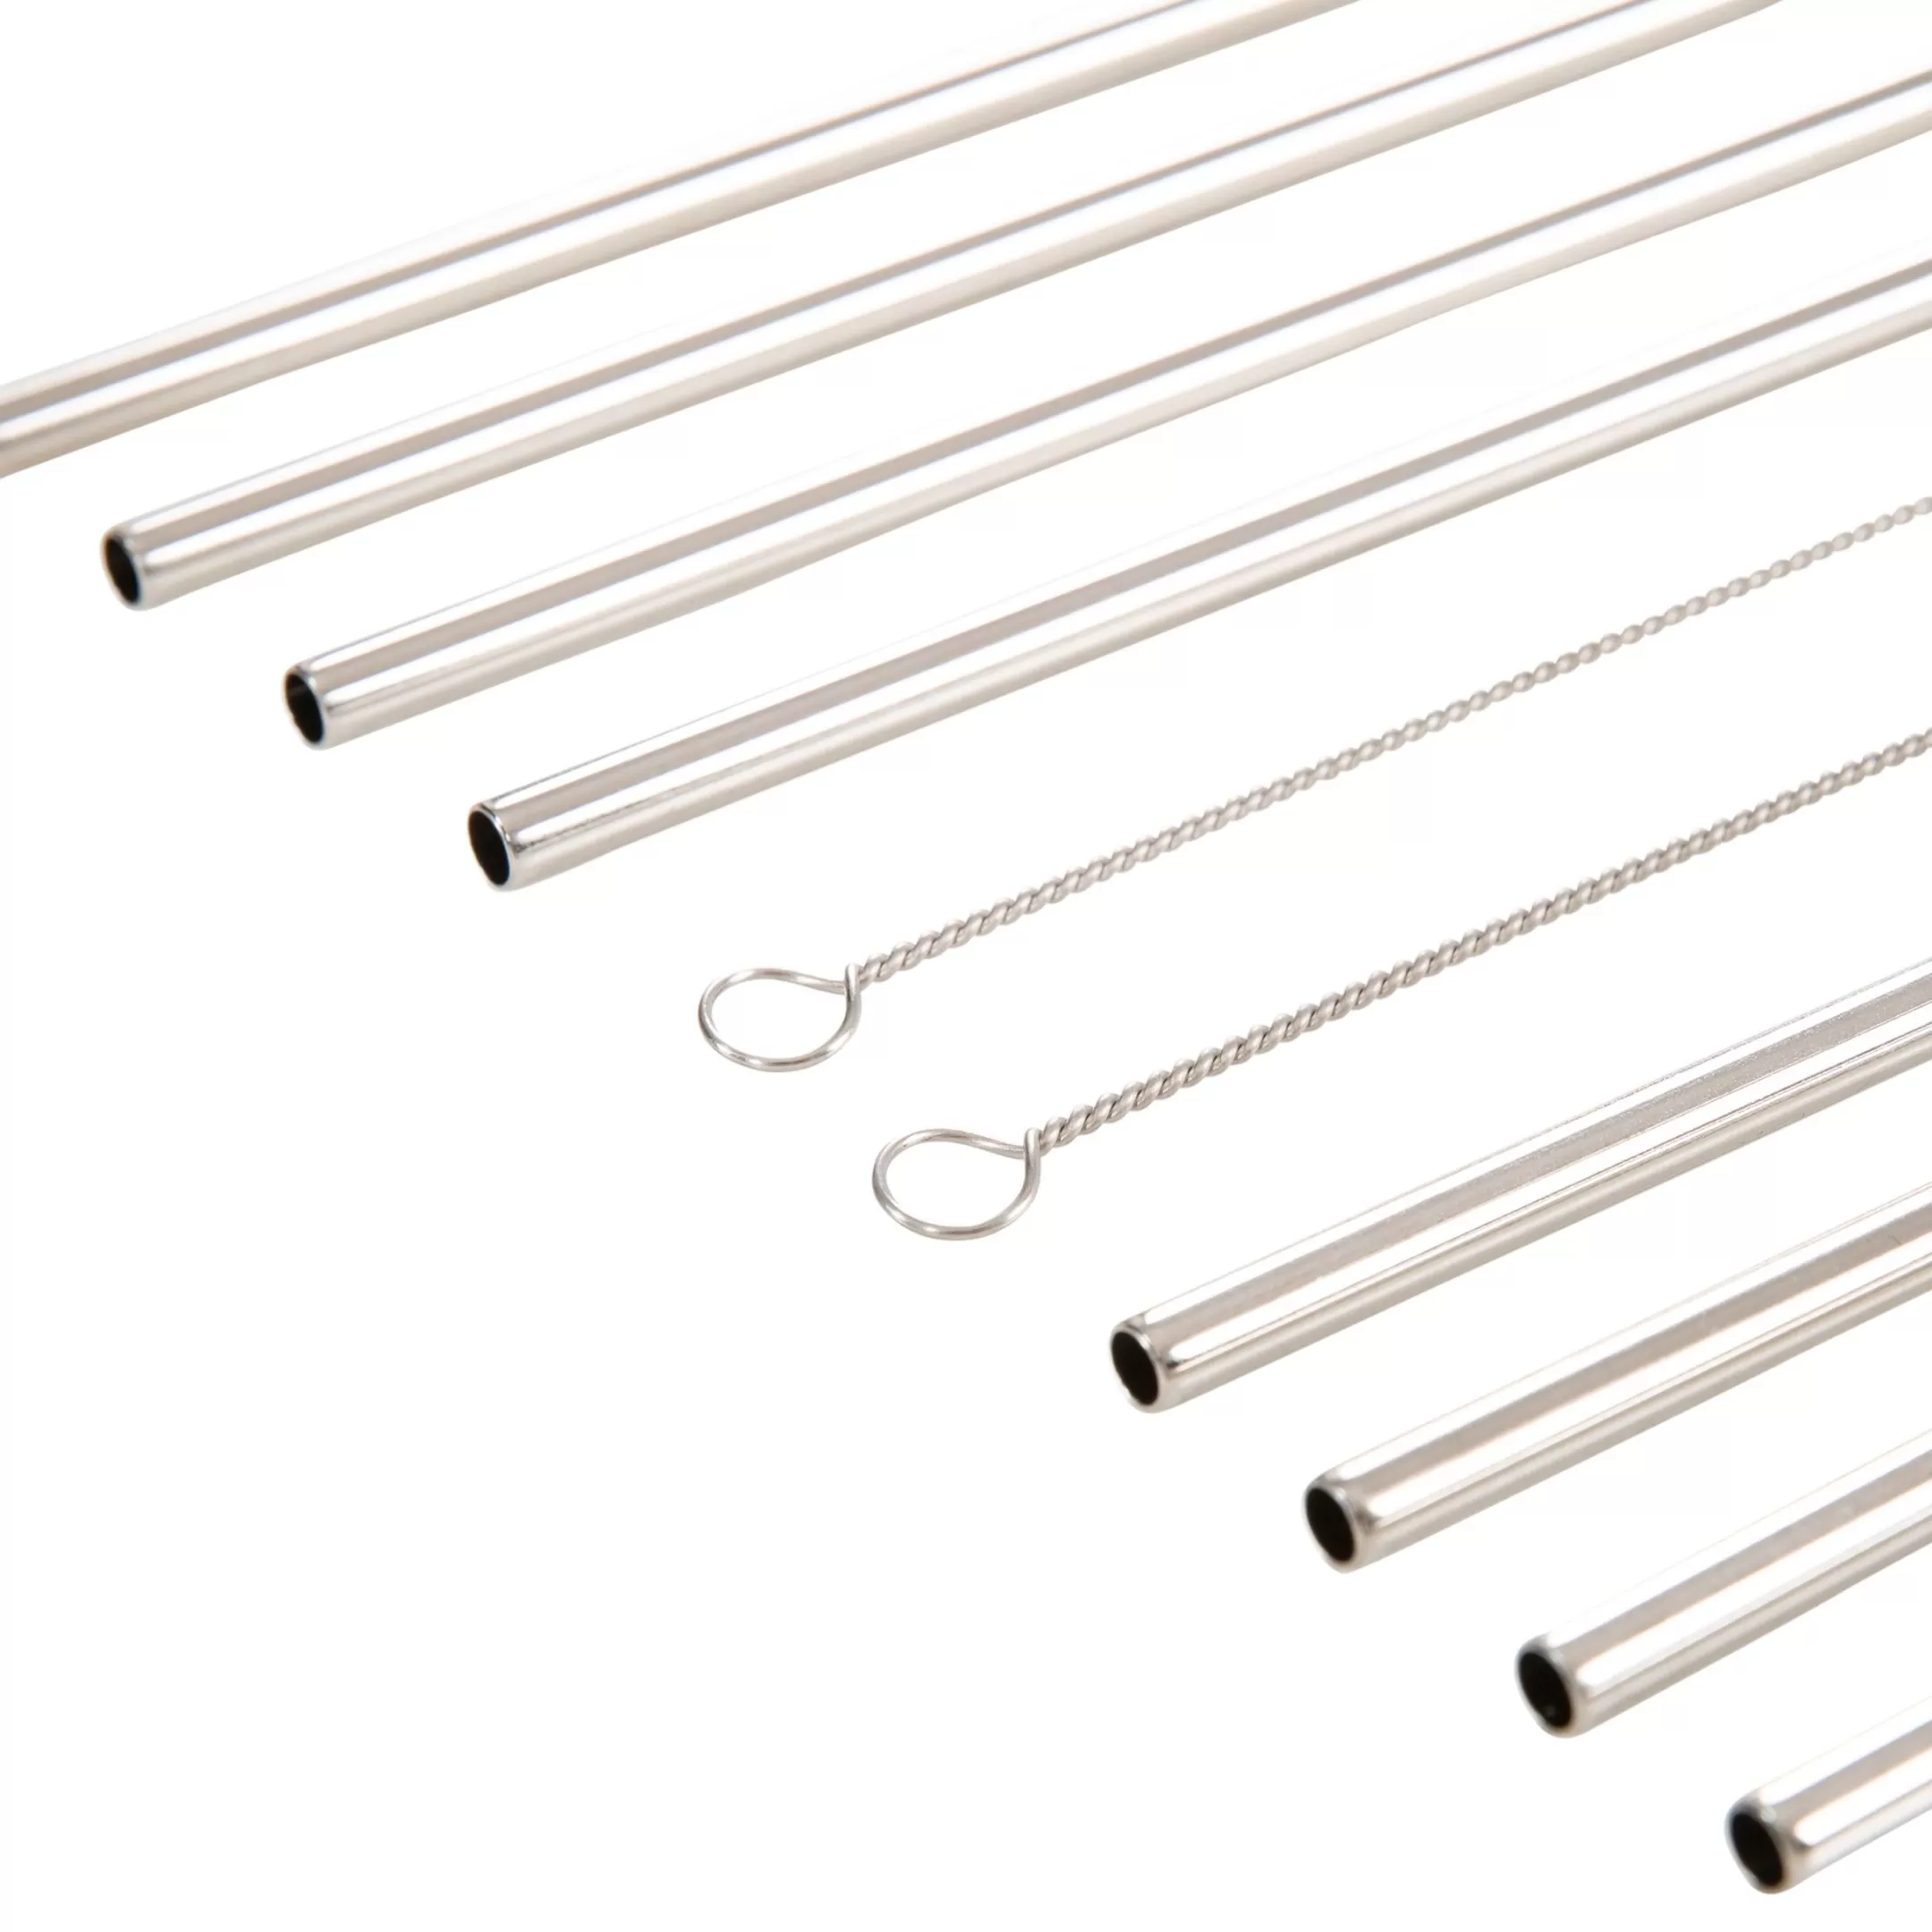 Stainless Steel Straws 8 Pack Foreverstraw | Trespass Discount